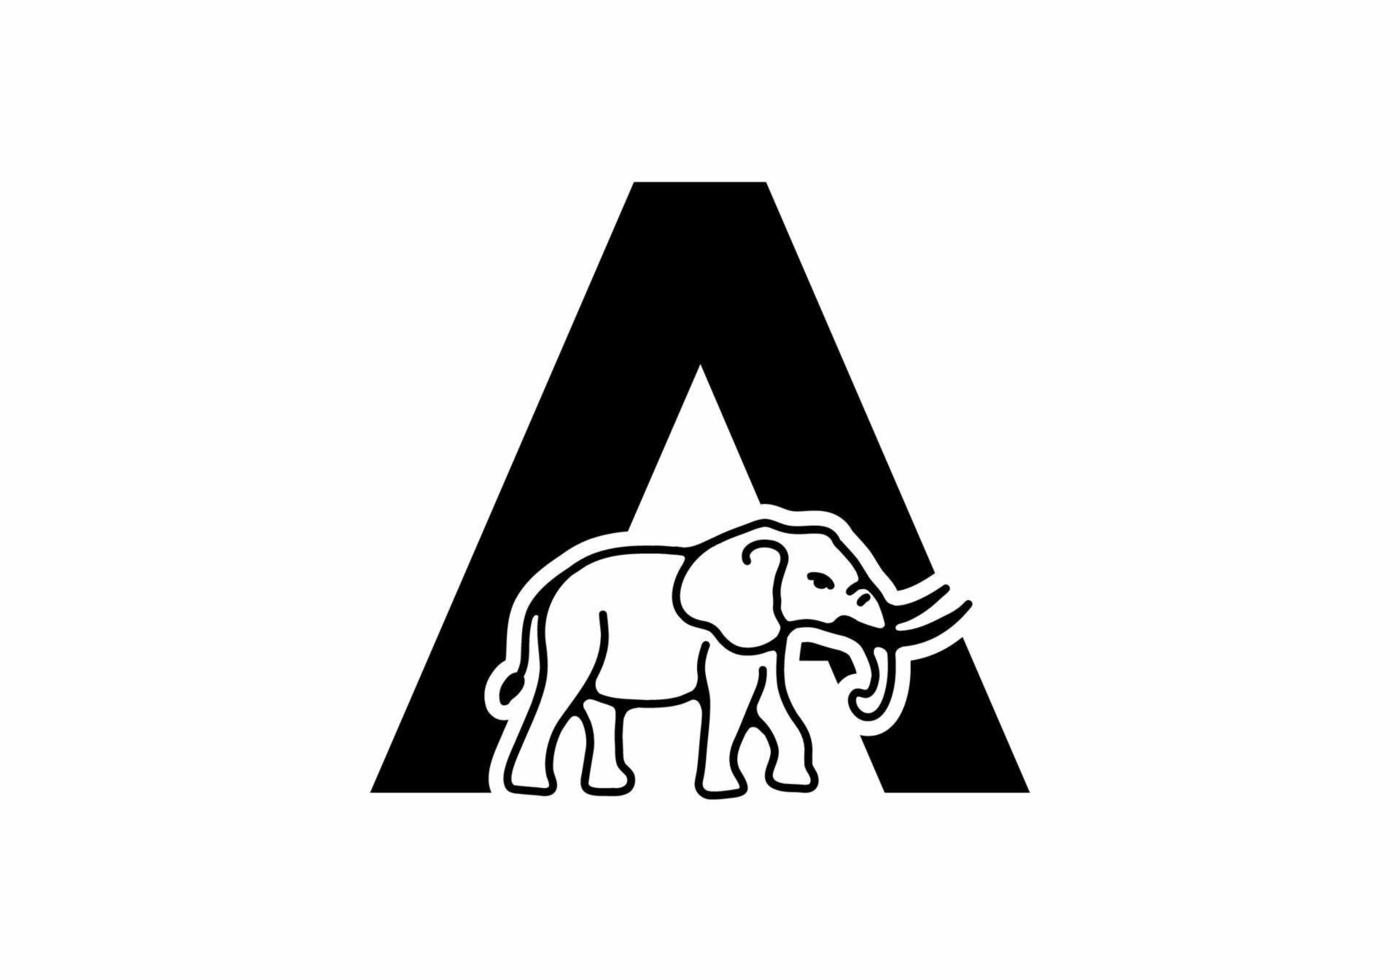 Initial letter A with elephant shape line art vector